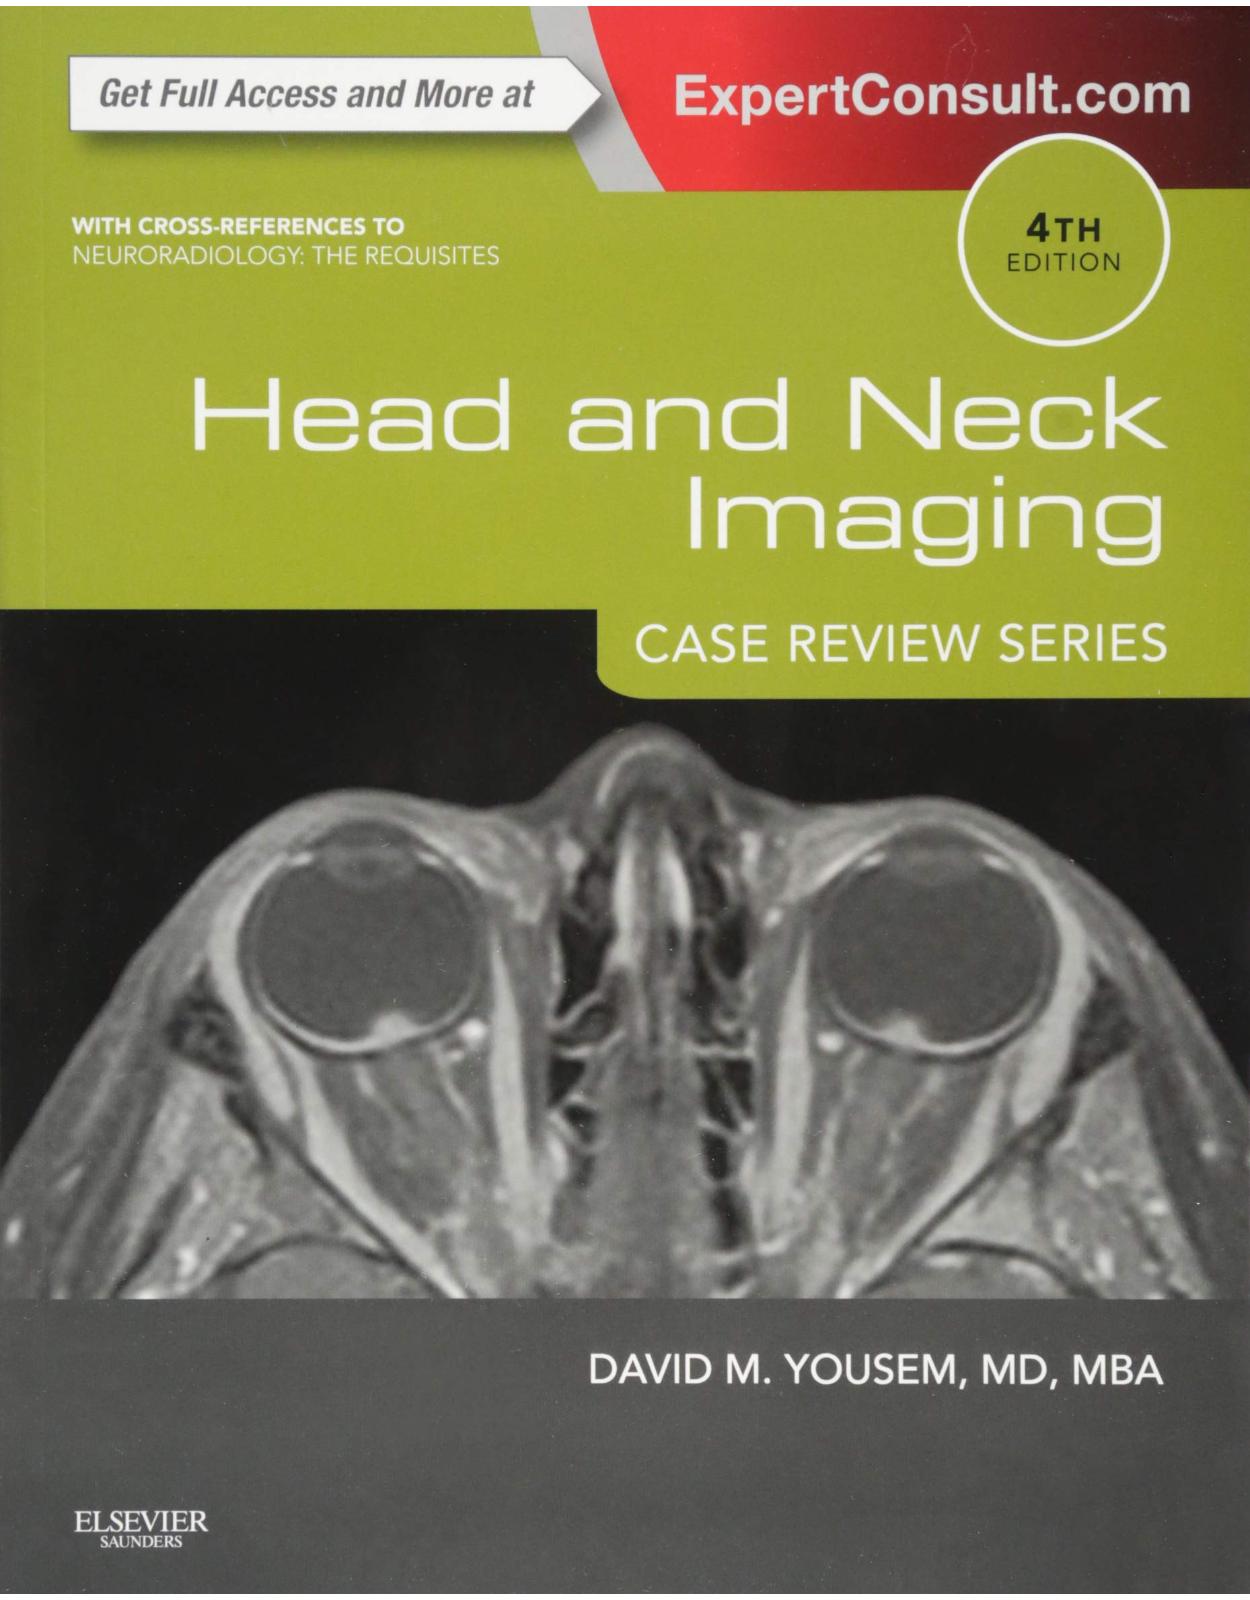 Head and Neck Imaging: Case Review Series, 4th Edition